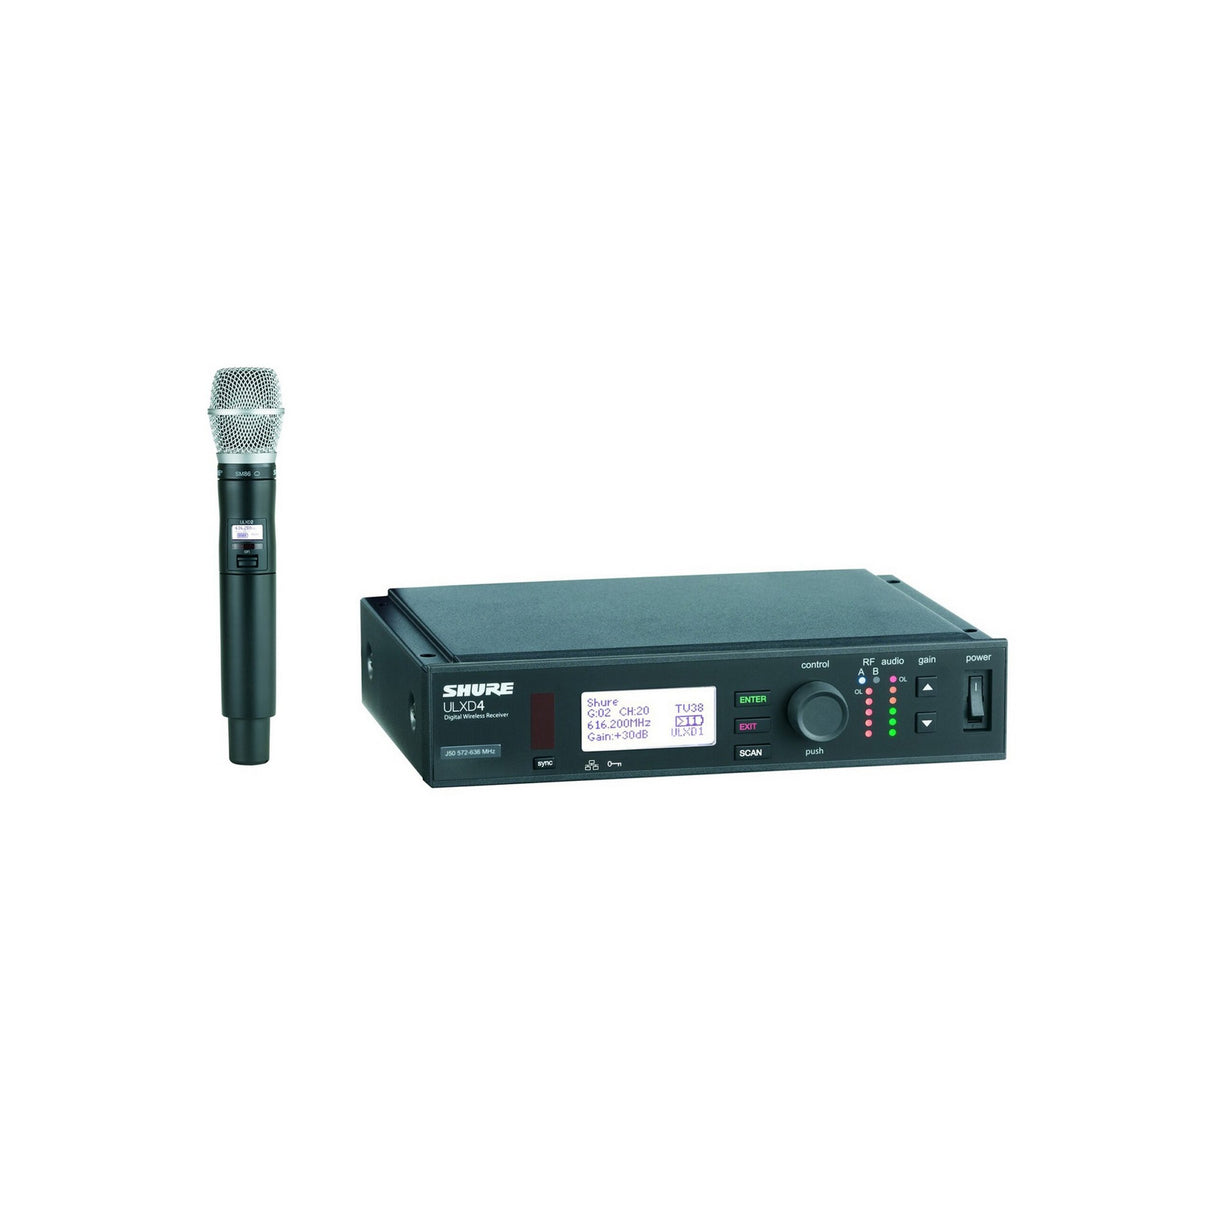 Shure ULXD24/SM86 Handheld Wireless Microphone System, H50 534-598 MHz